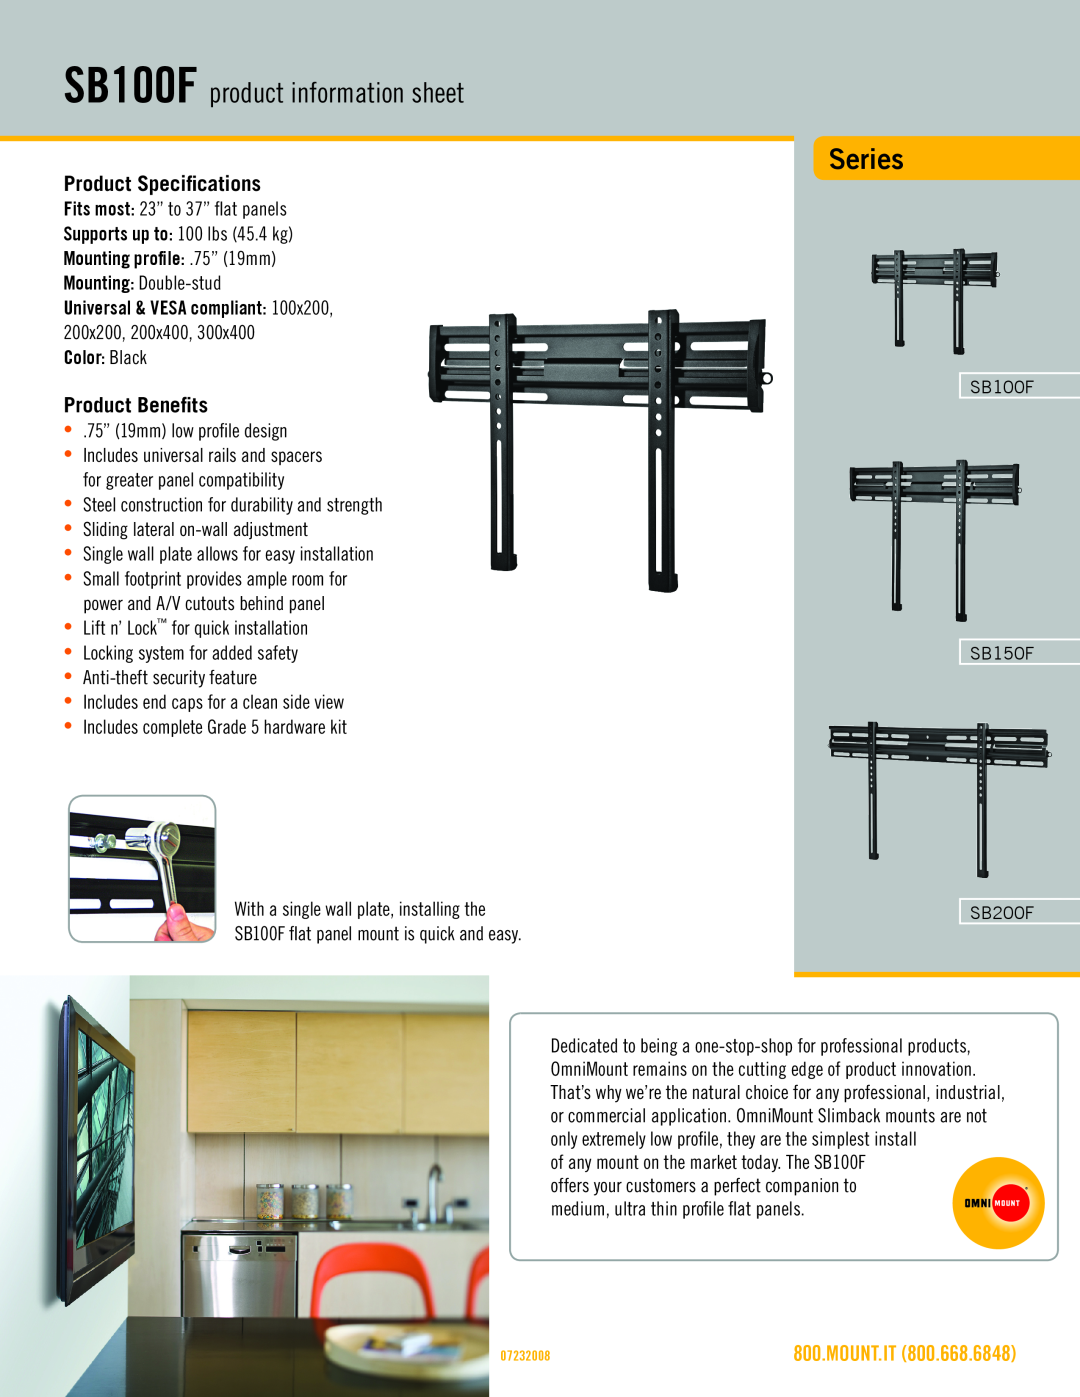 Omnimount manual SB100F product information sheet, Product Specifications, Product Benefits, Mounting profile .75” 19mm 